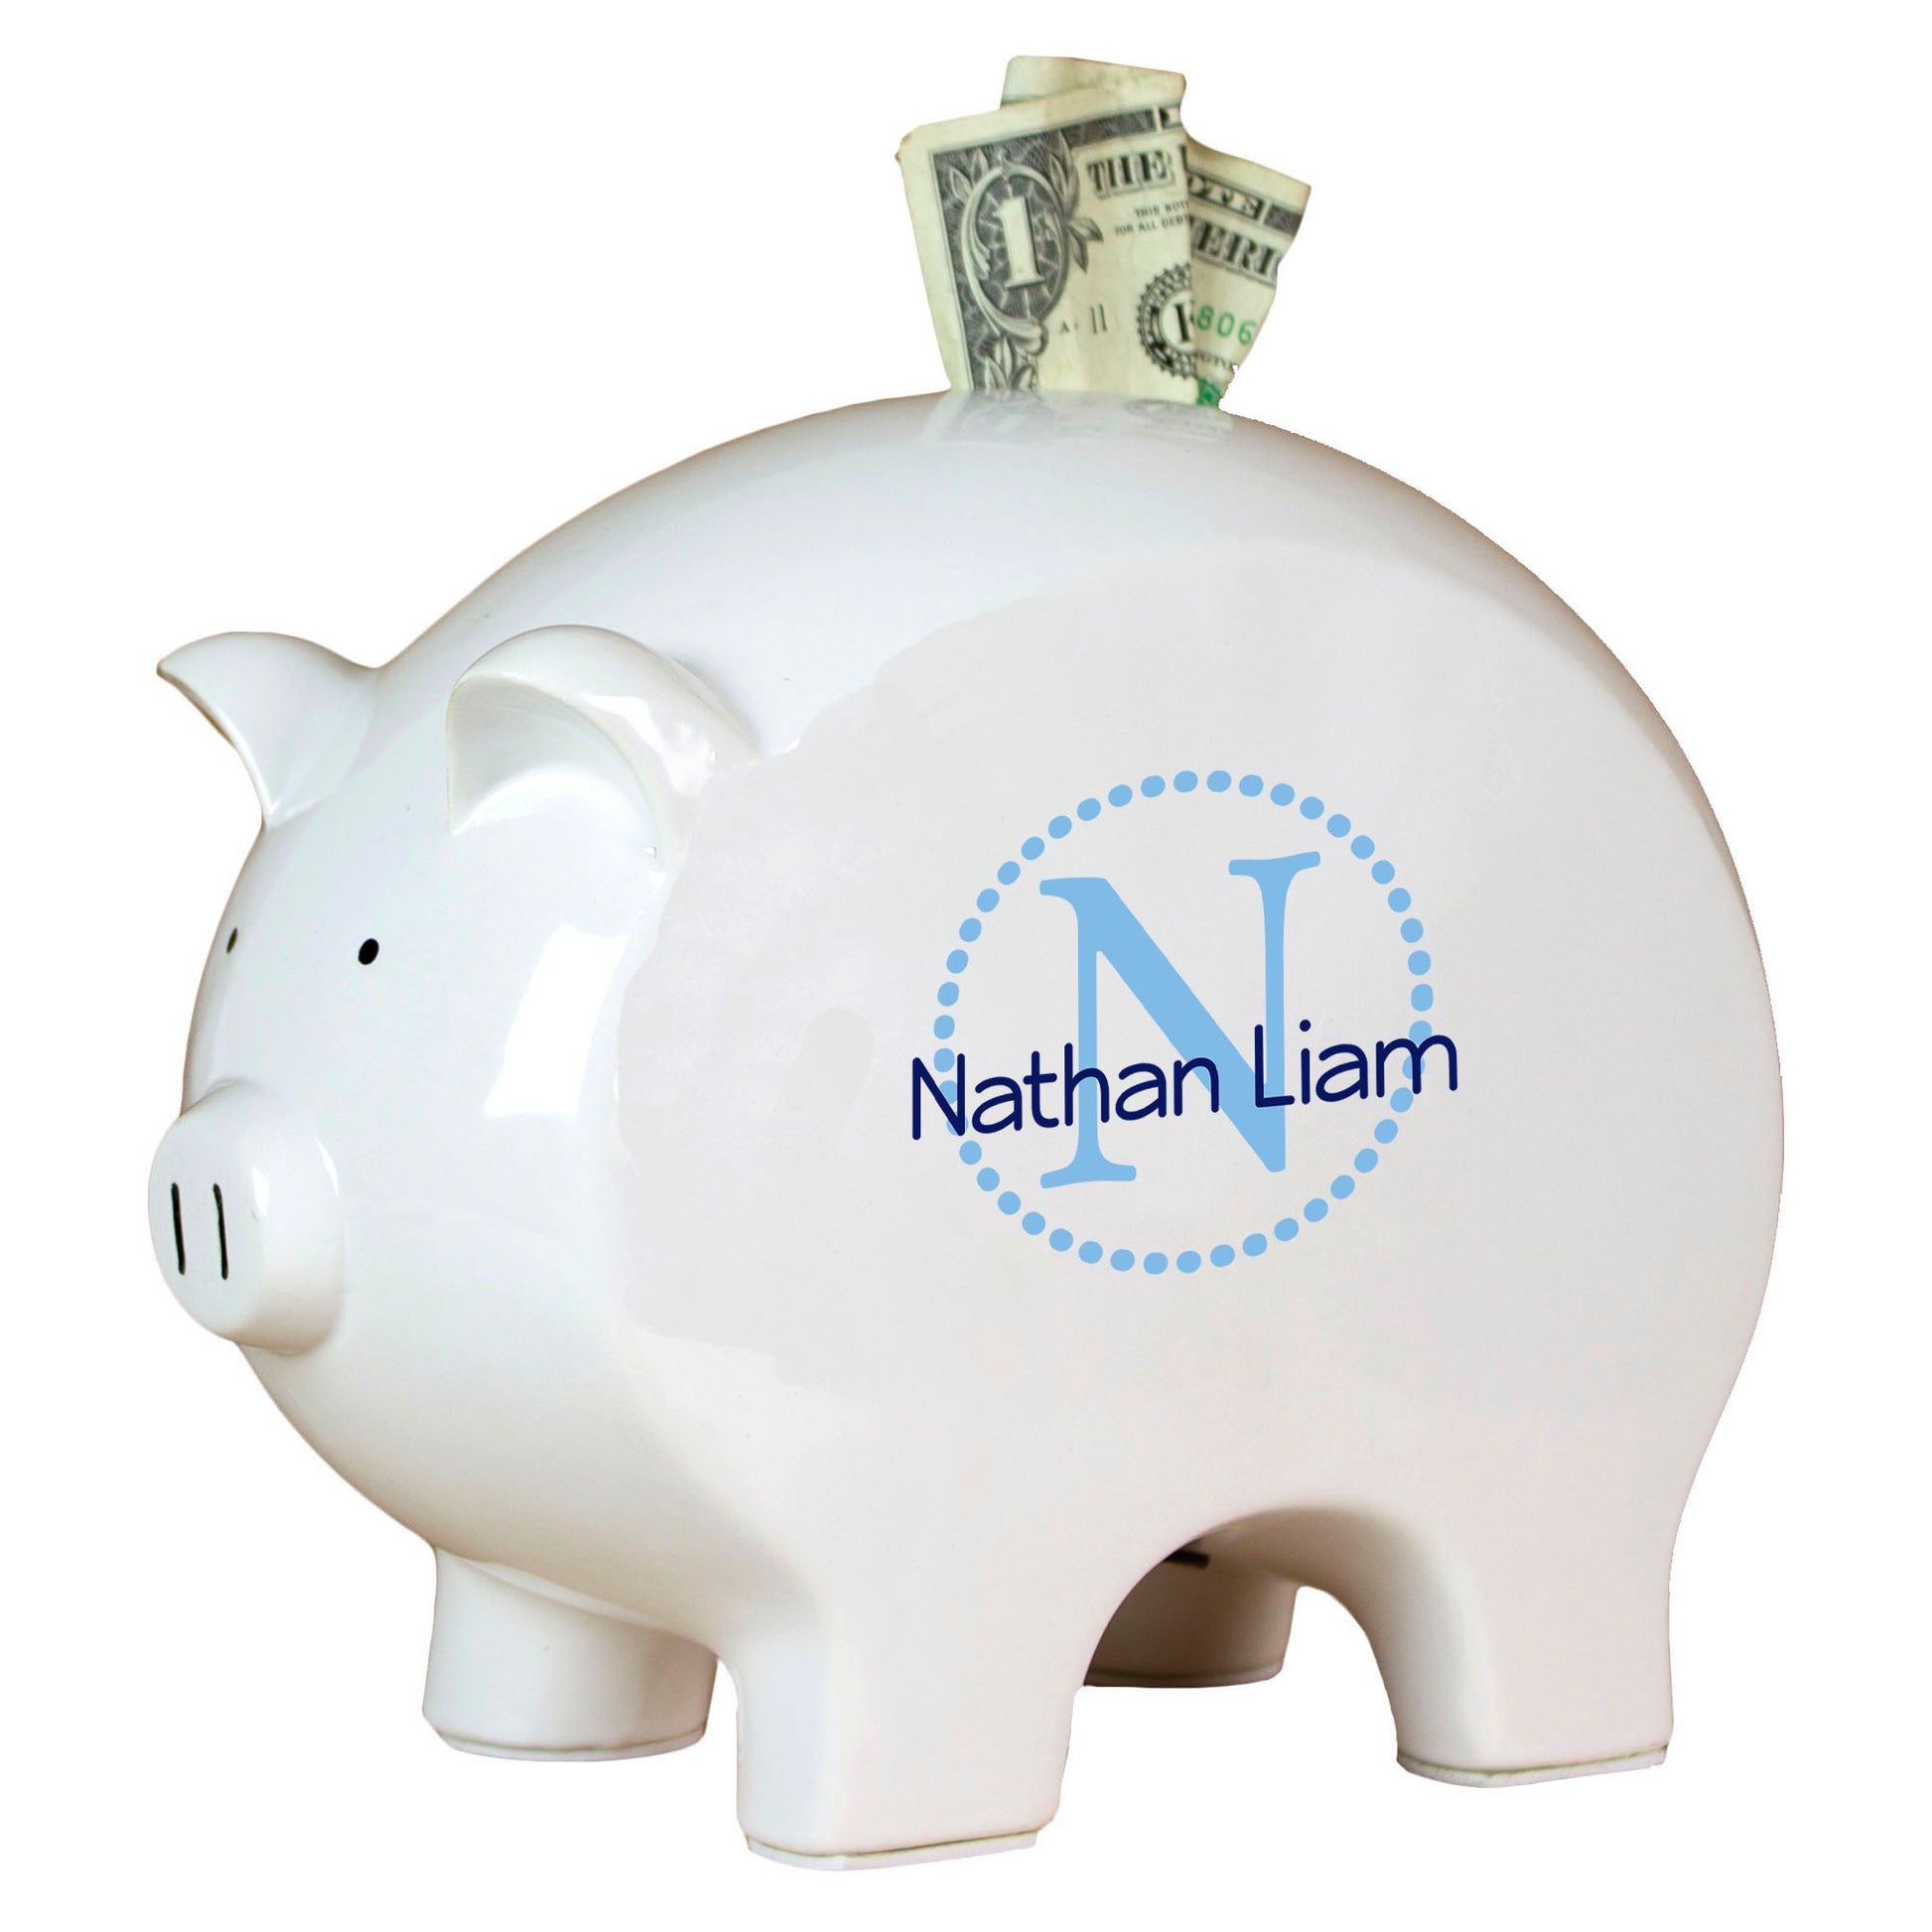 Personalized Piggy Bank with Aqua monogrammed design